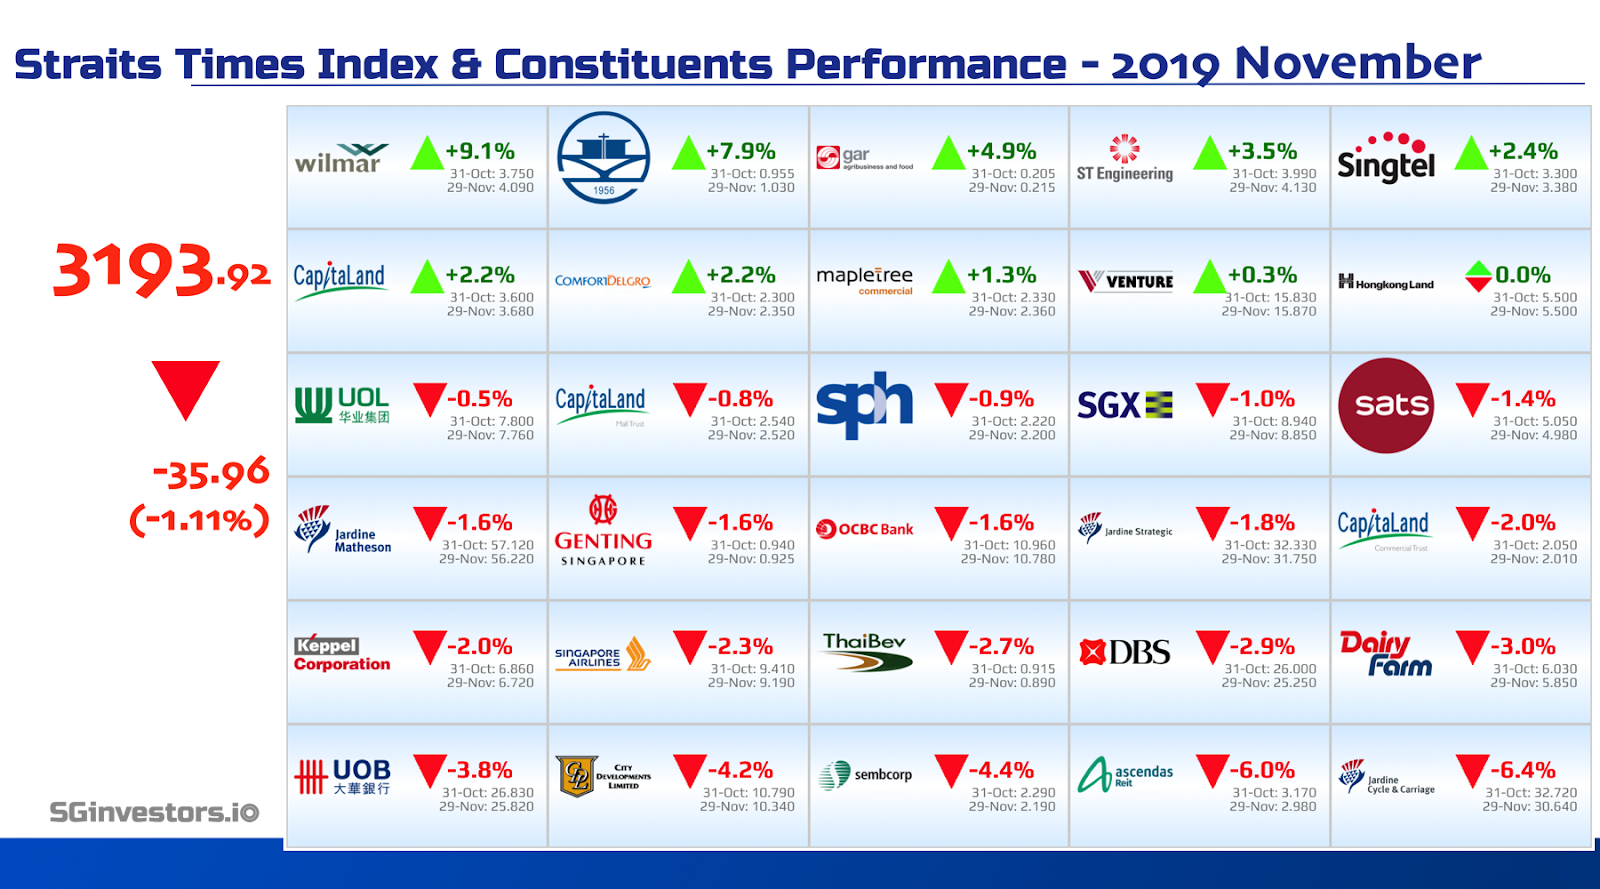 Performance of Straits Times Index (STI) Constituents in November 2019